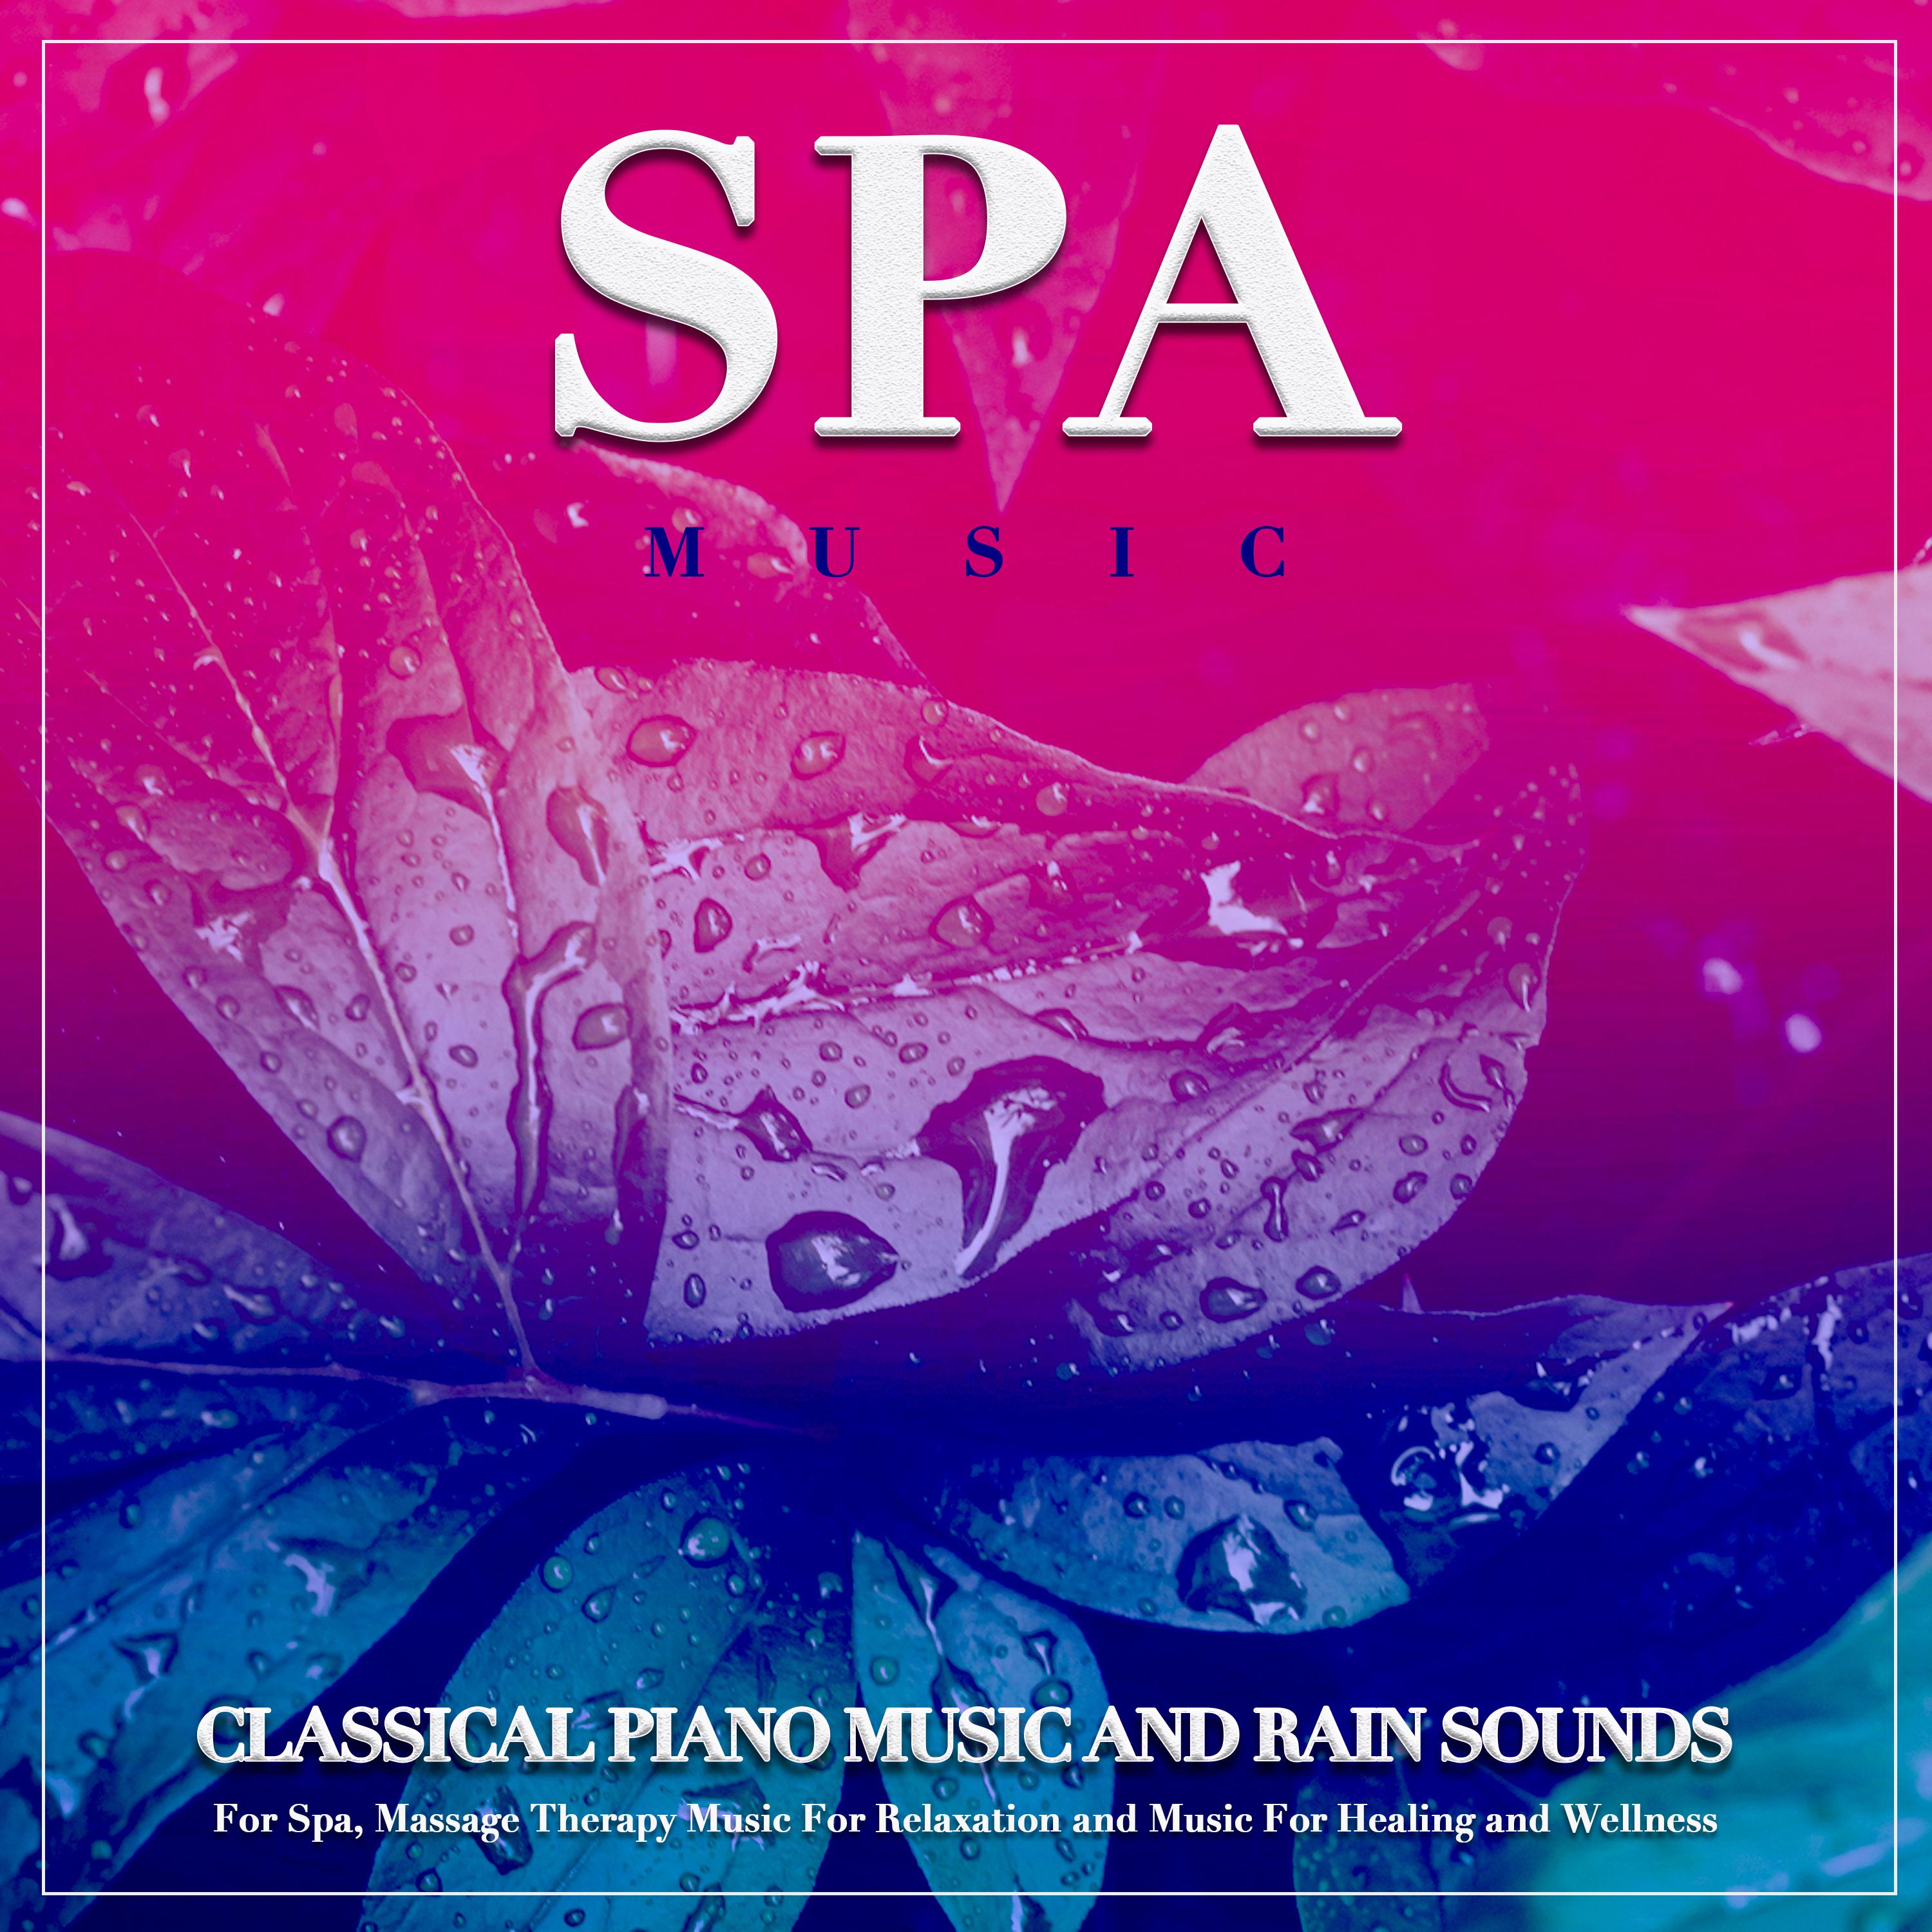 Gymnopedie No.1 - Satie - Classical Piano and Rain Sounds - Spa Music